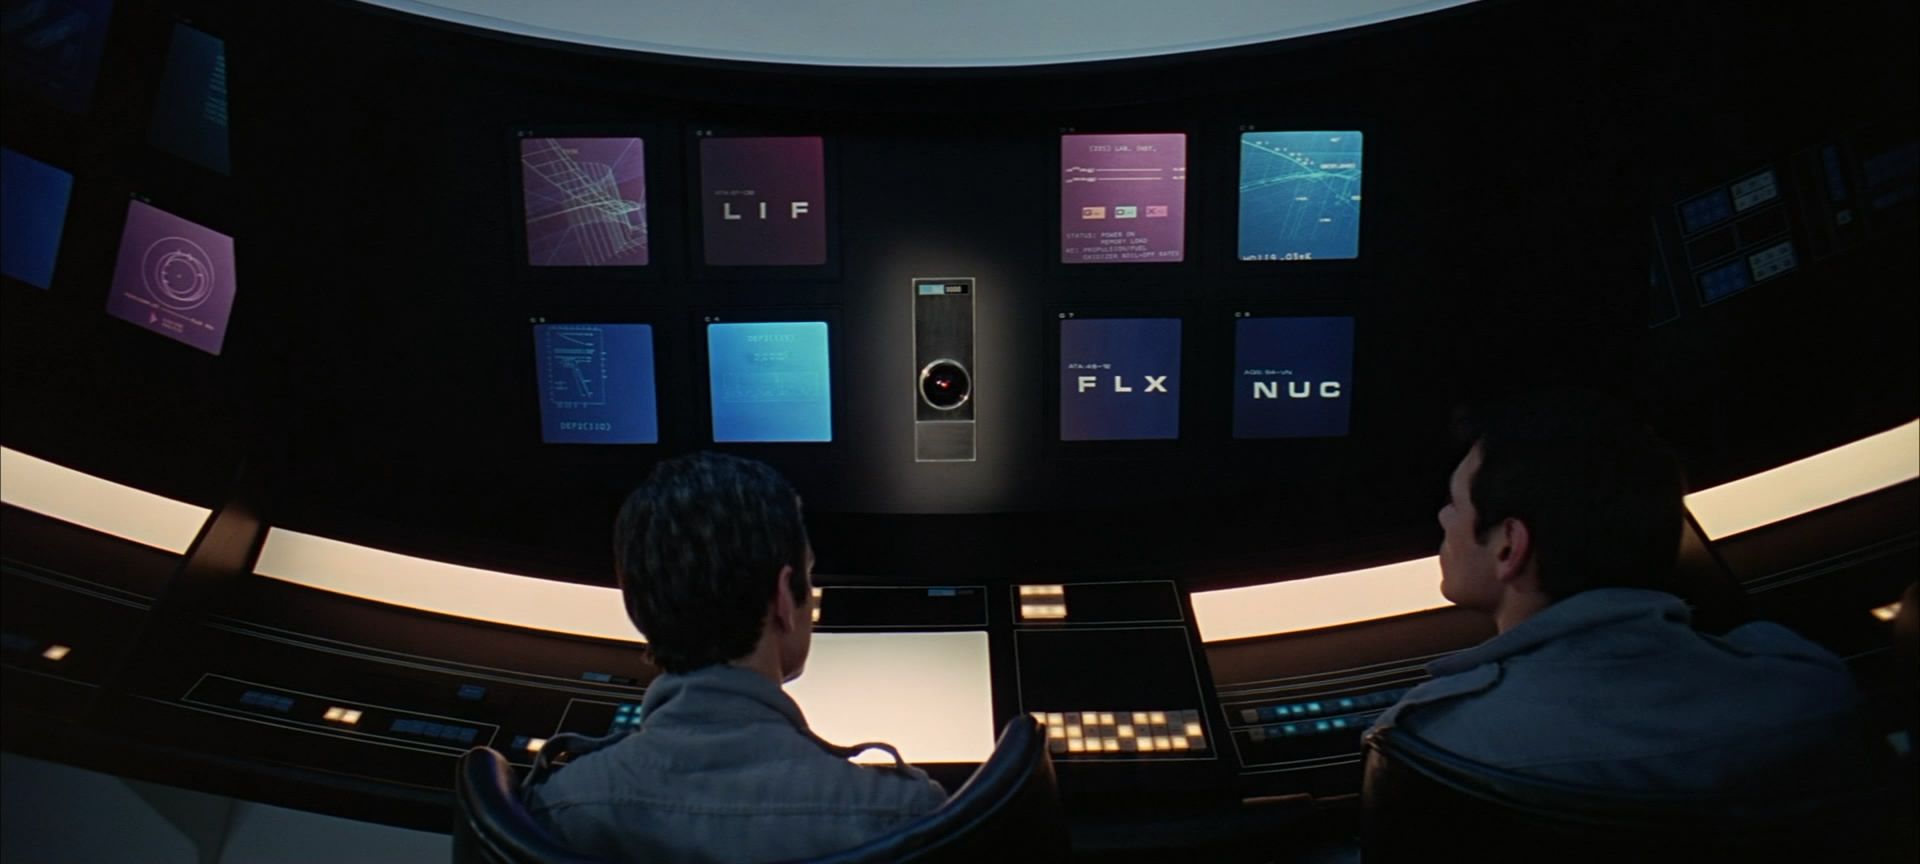 I'm a huge fan of 2001: A Space Odyssey and Specifically the HAL